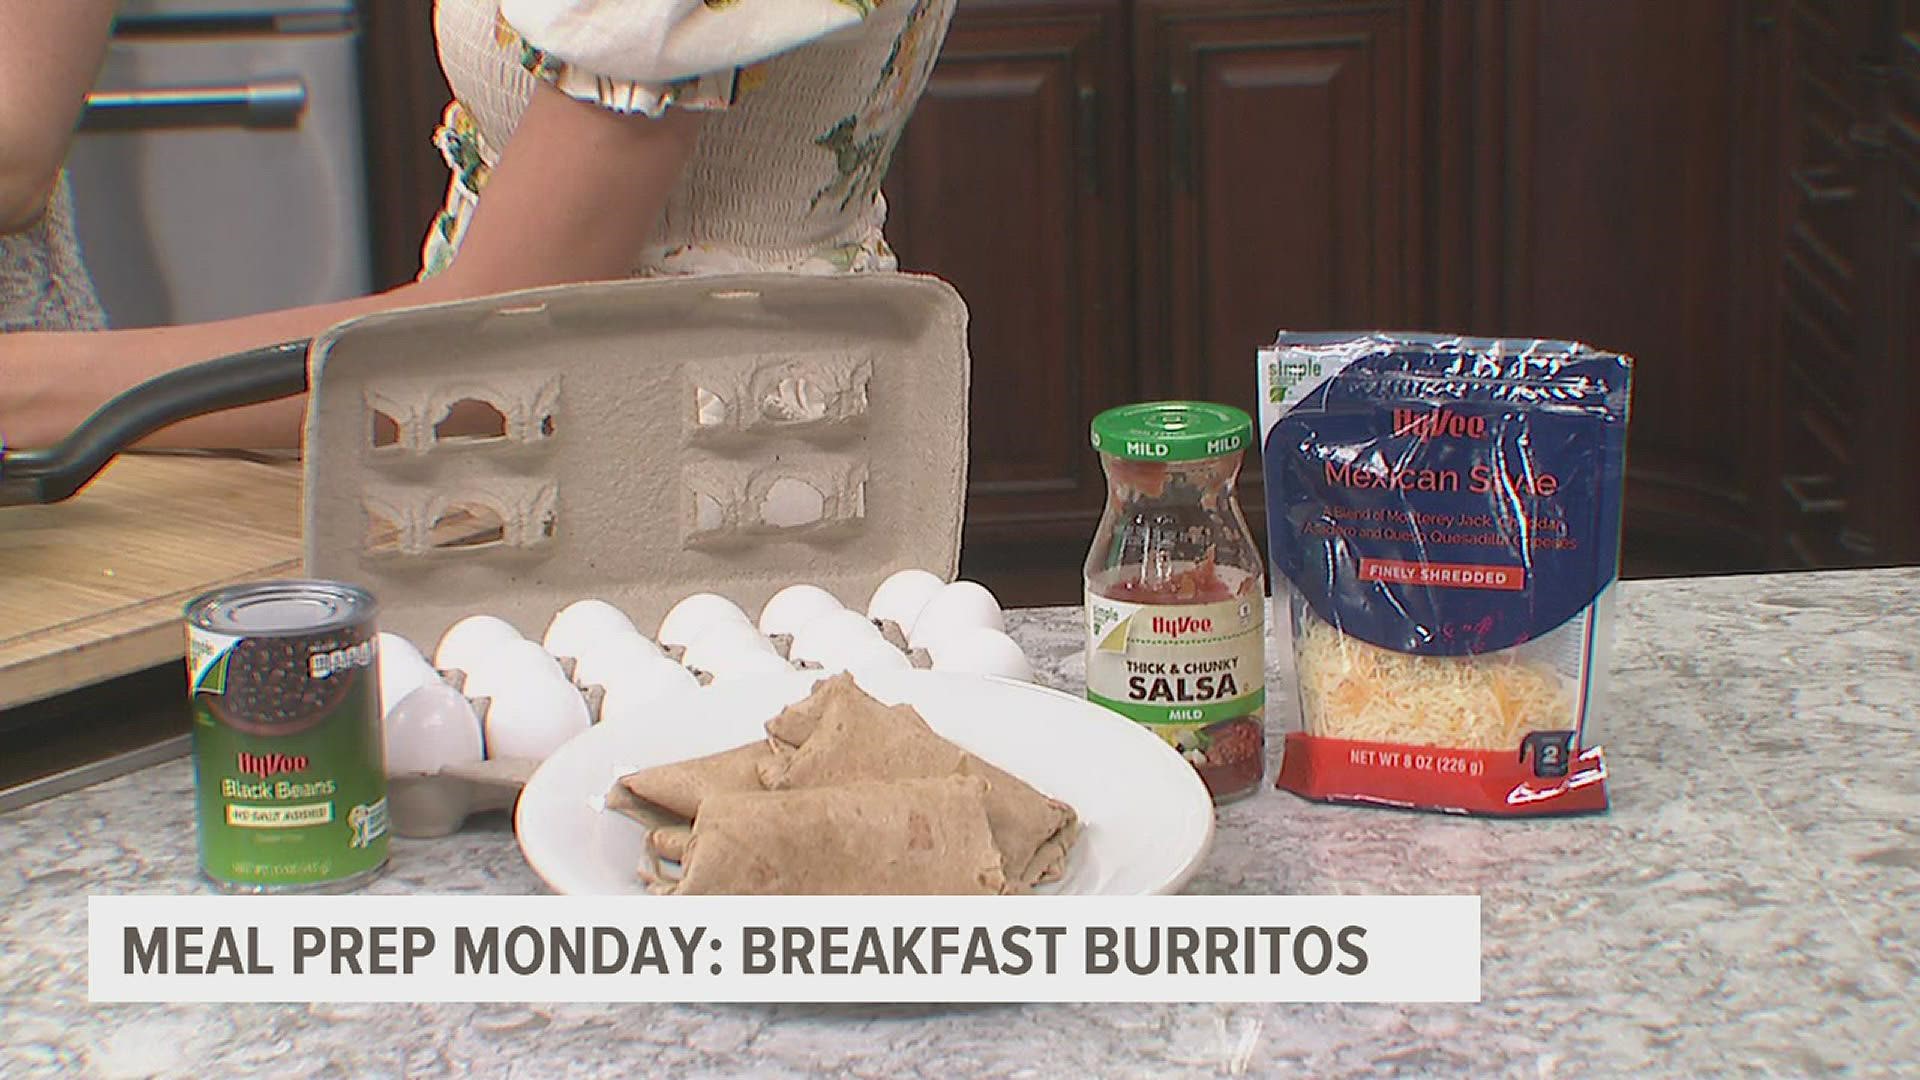 Breakfast burritos are a popular item at restaurants and grocery stores; here's how you can make them yourself.